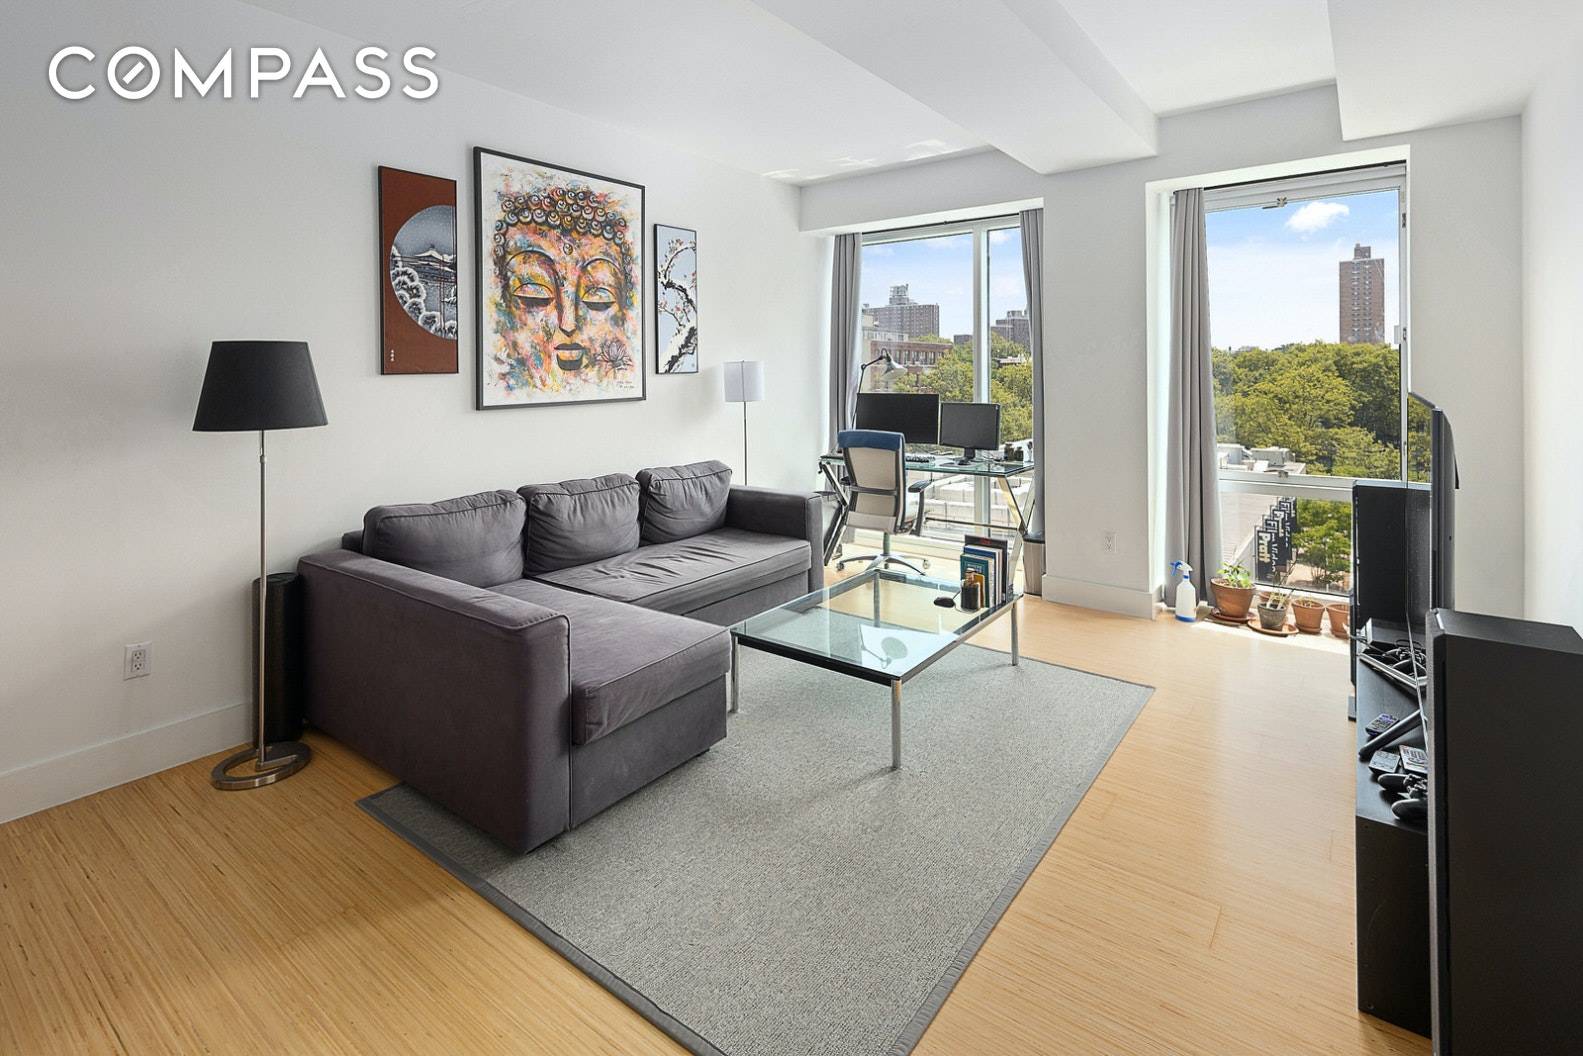 This south facing, sun filled luxury condo unit is located across from Pratt University, in the heart of the vibrant Clinton Hill neighborhood.